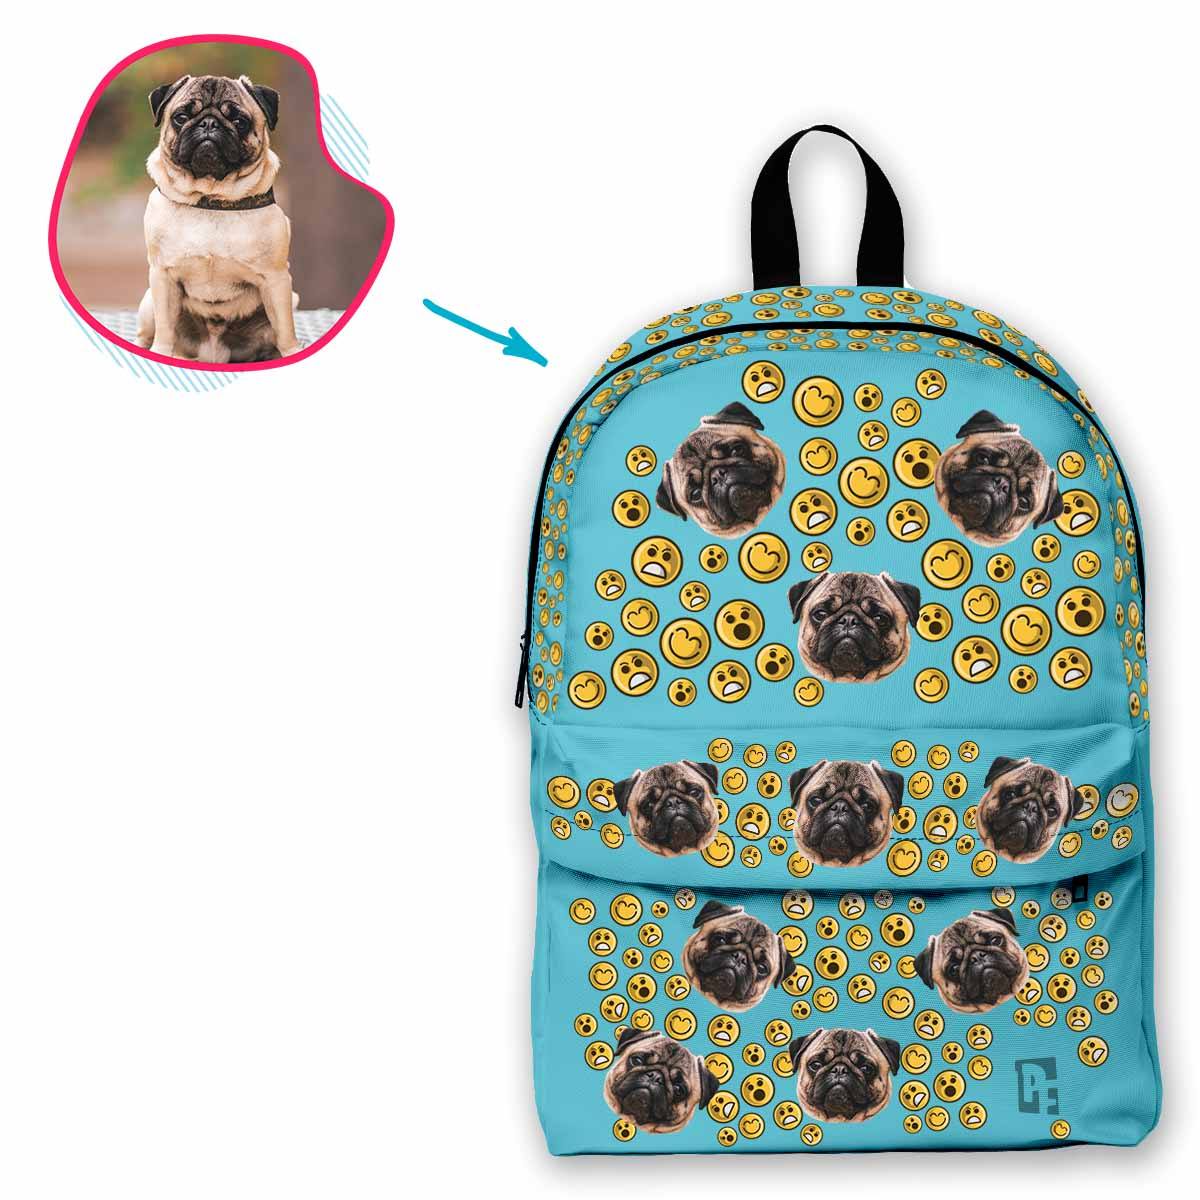 blue Smiles classic backpack personalized with photo of face printed on it